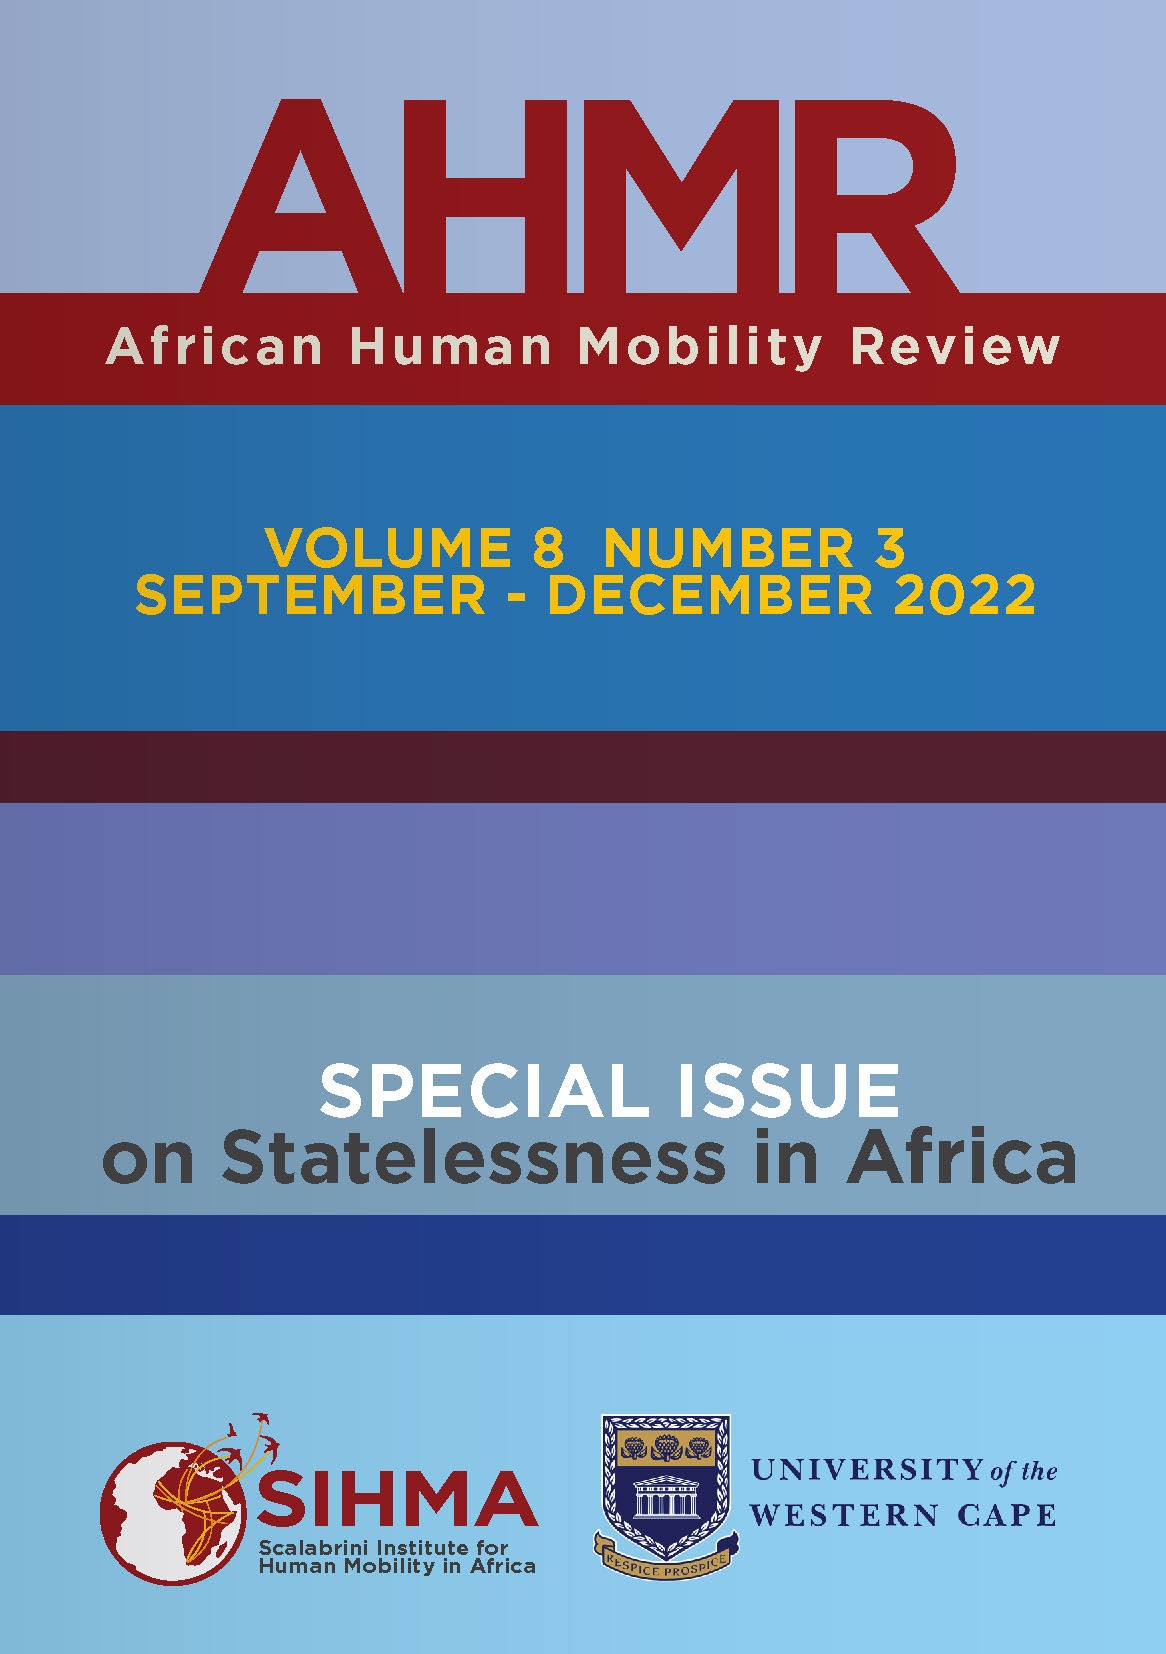 https://sihma.org.za/photos/shares/AHMR cover 8-3 special issue online.jpg